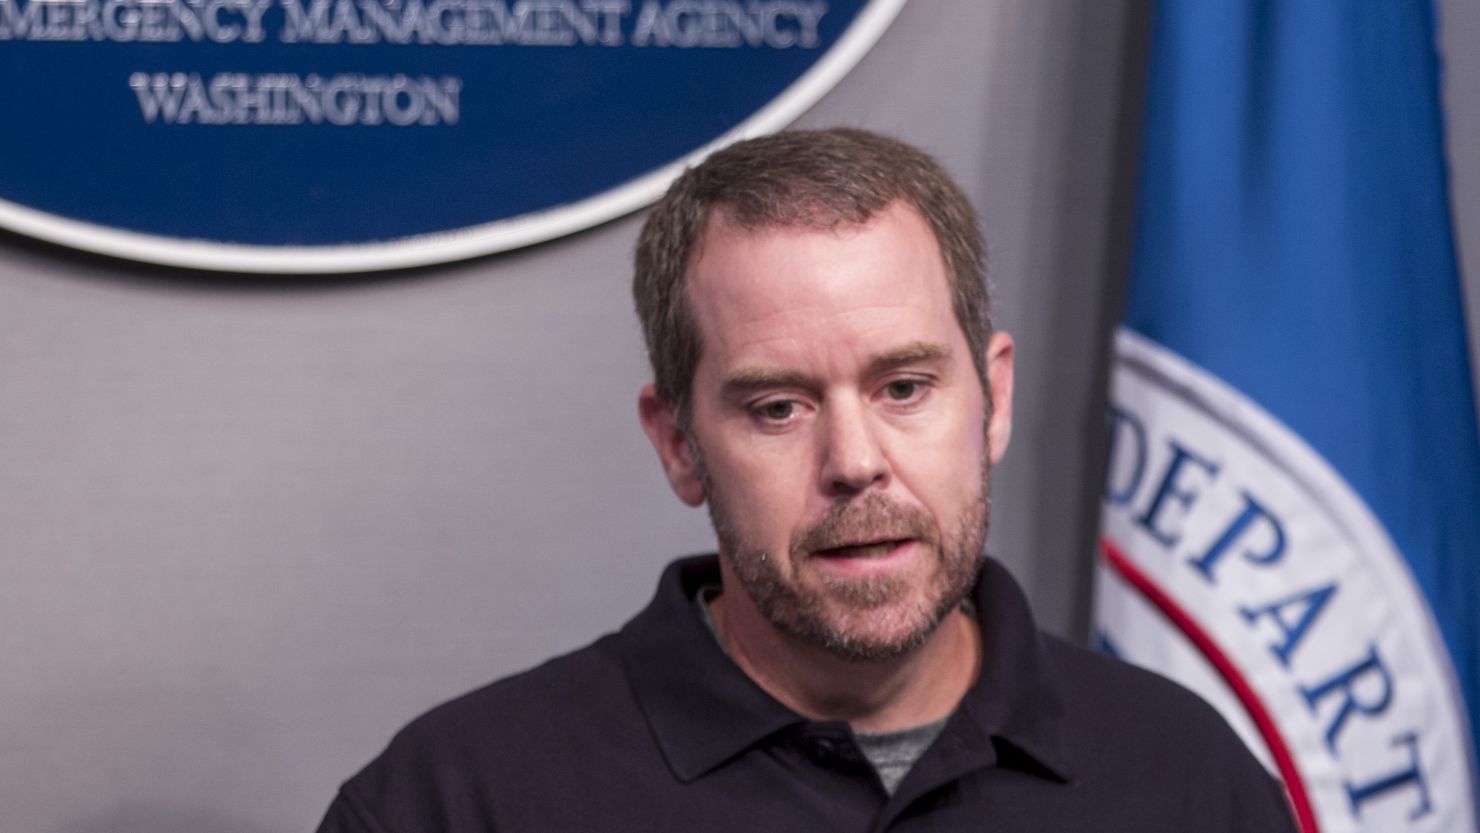 Jeff Byard speaks during a news conference on Hurricane Florence preparations at the FEMA headquarters in Washington on Wednesday, September 12, 2018.